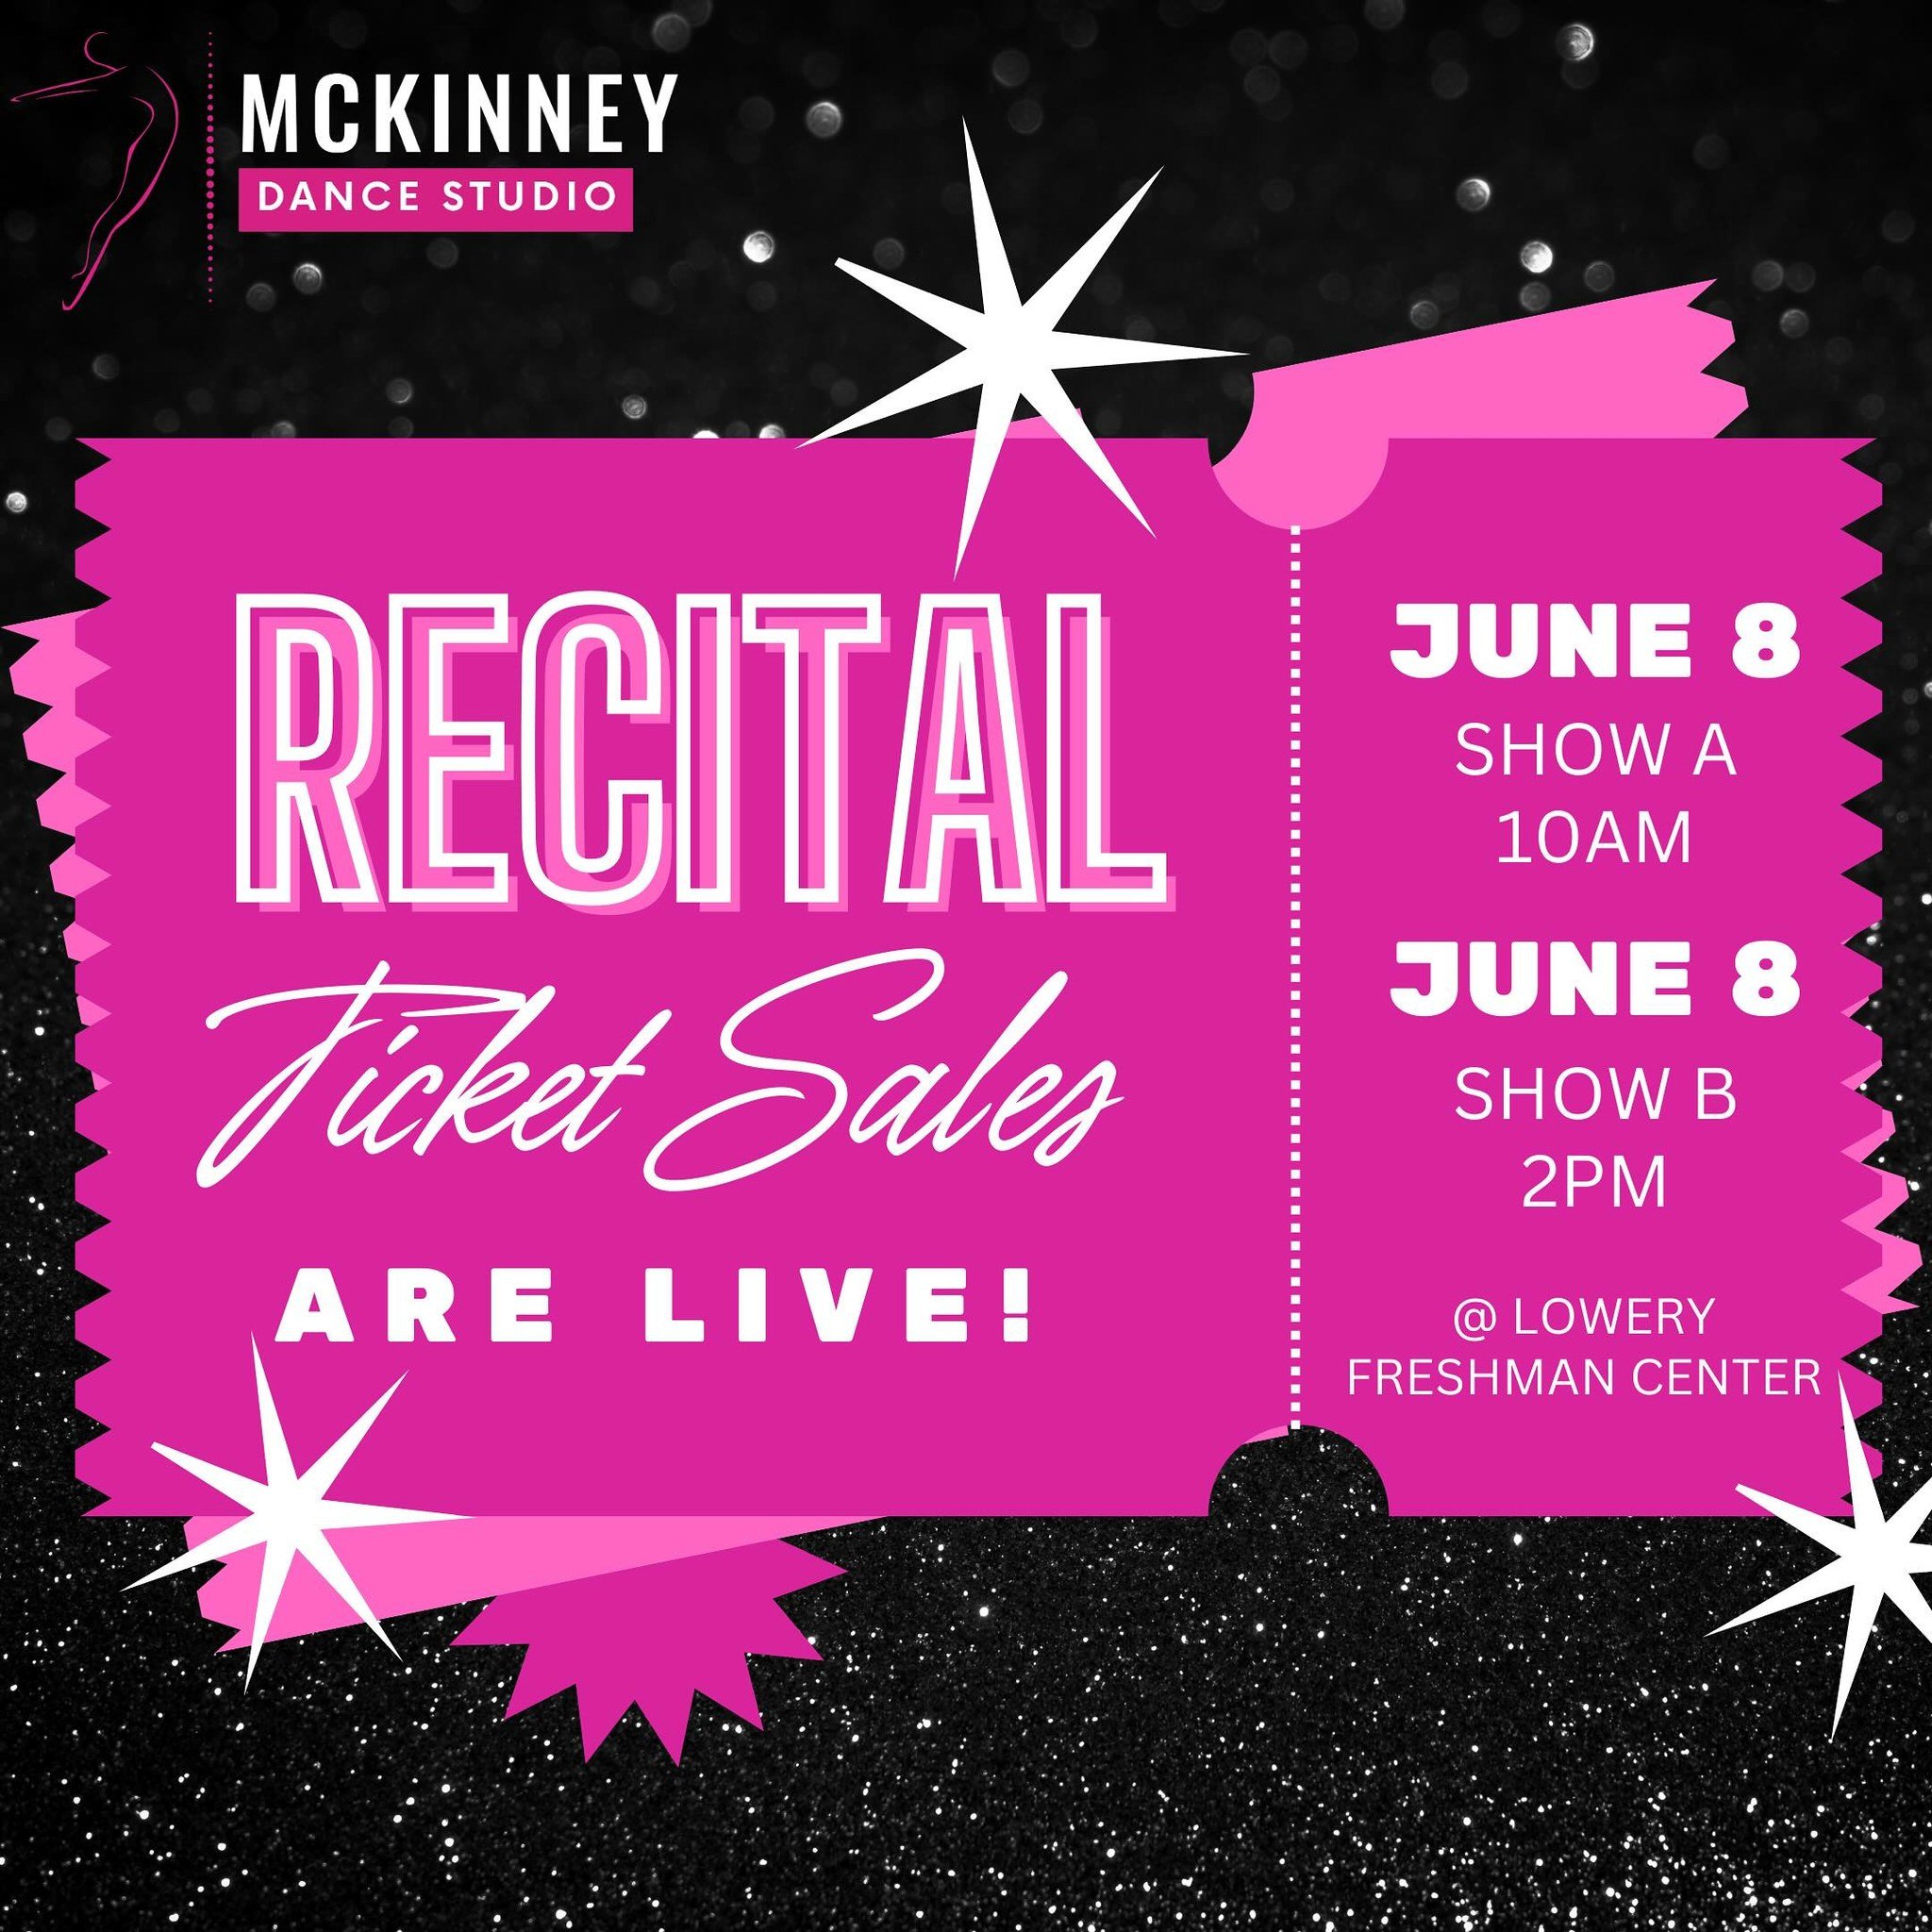 🎟 RECITAL TICKETS ARE NOW AVAILABLE FOR PURCHASE!🎟

As a reminder, all performing dancers do NOT need to purchase a ticket. Click on the link in our bio to purchase! 

#passionartistrydance #discovertheartistwithin #allendancestudio #mckinneydances